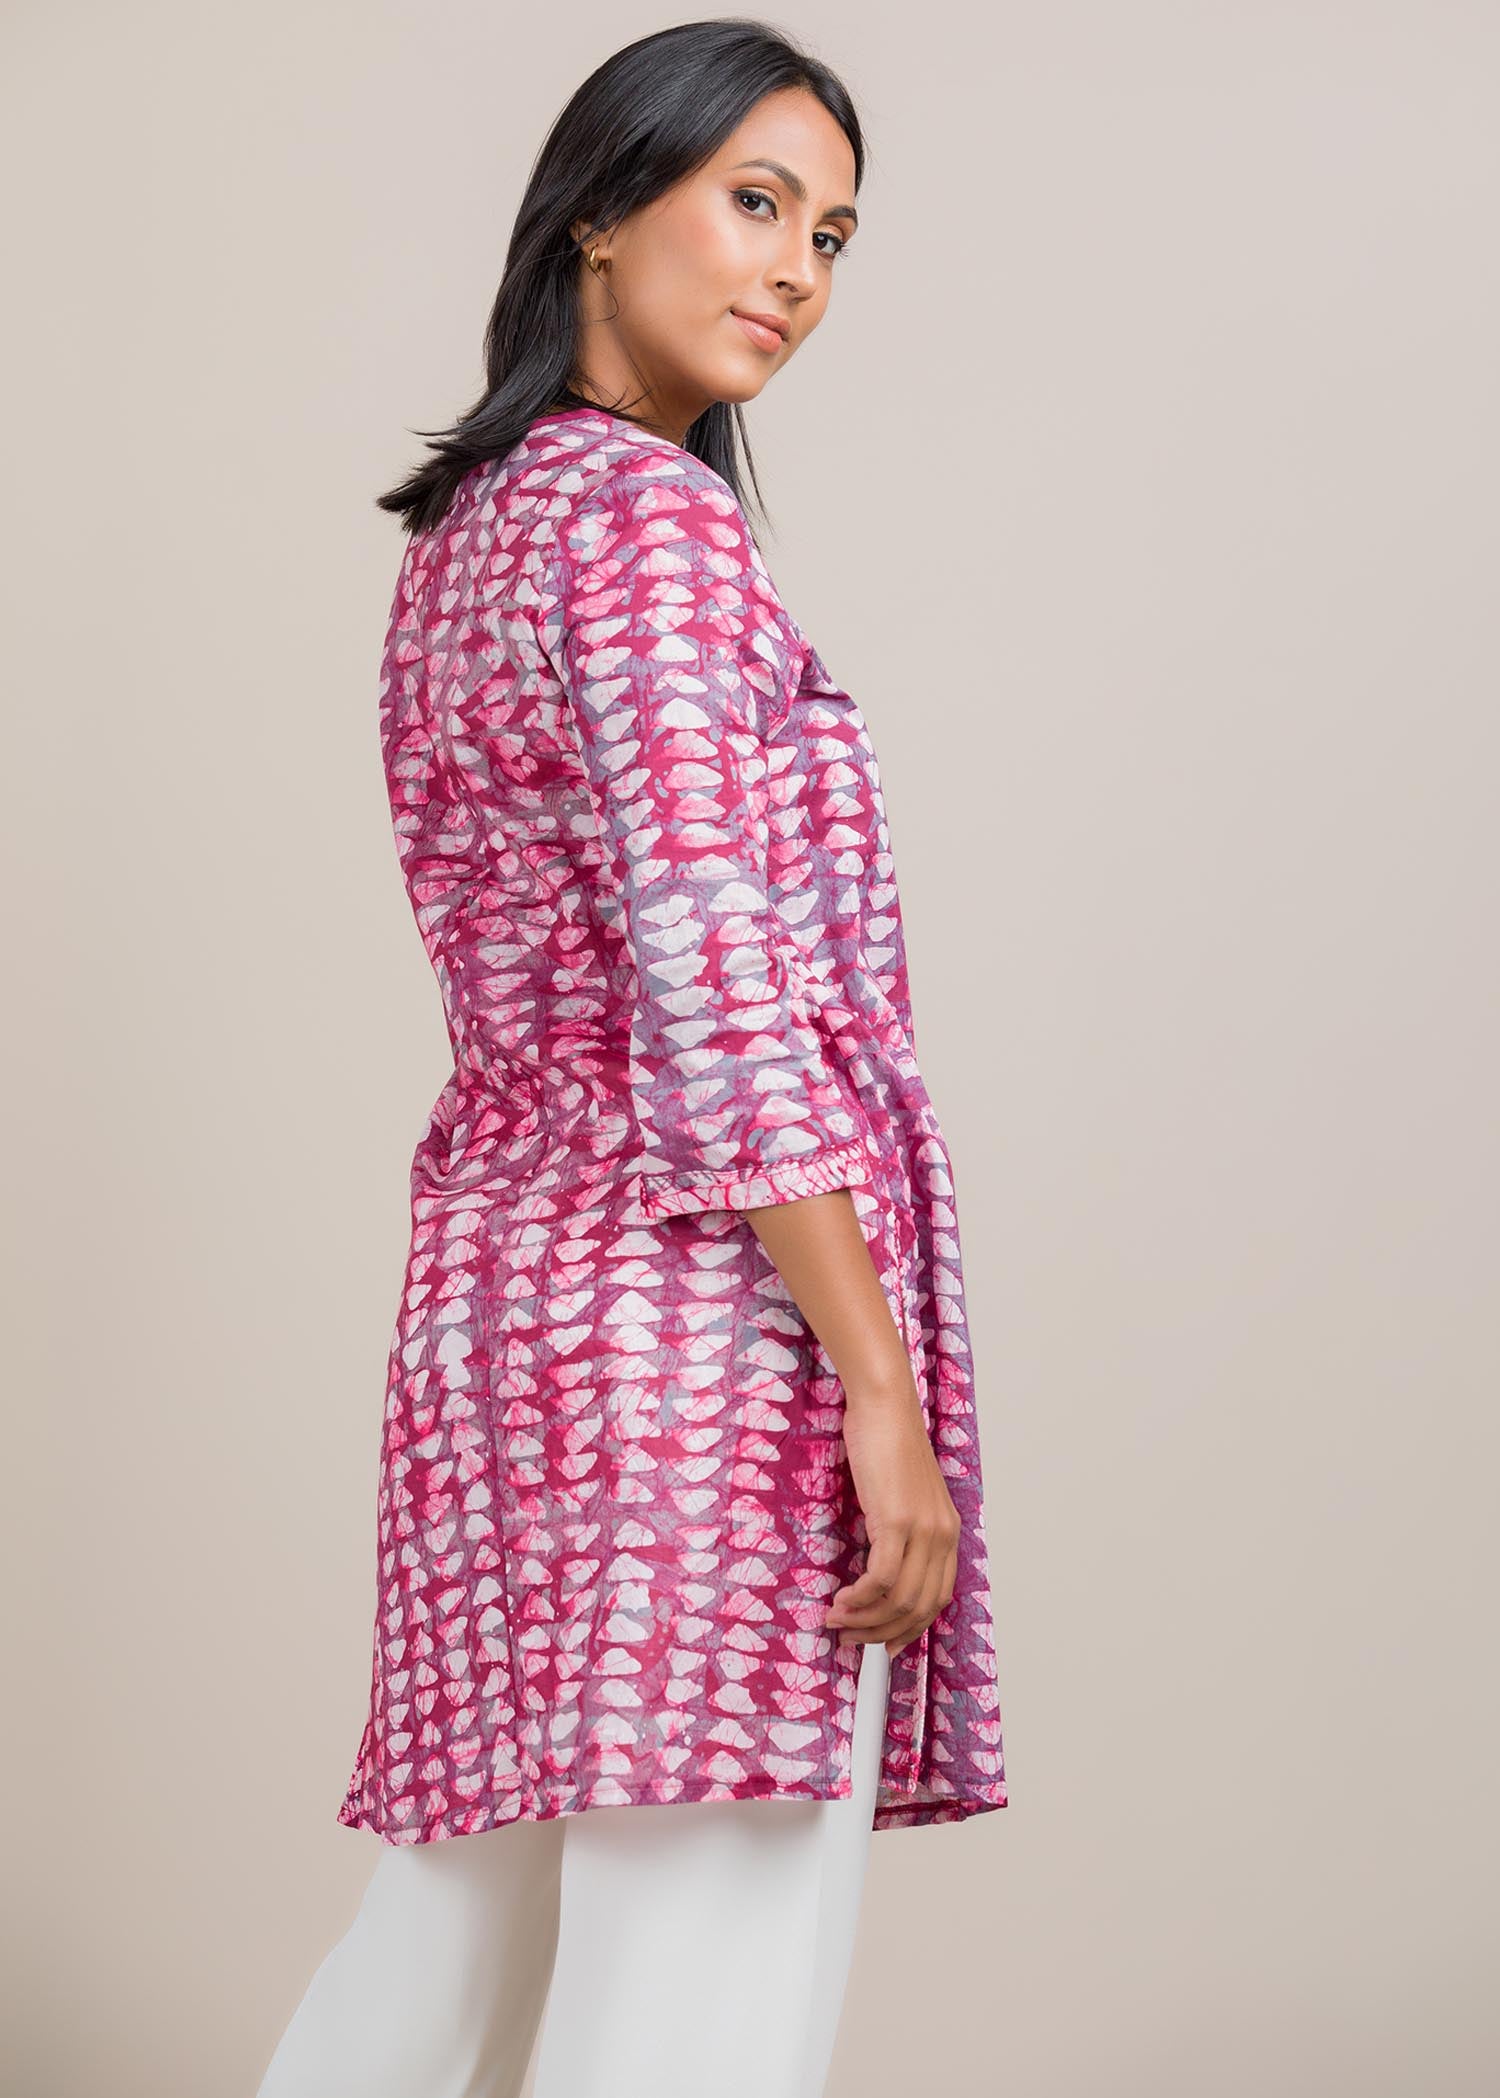 Kurtha top with contrass pipin